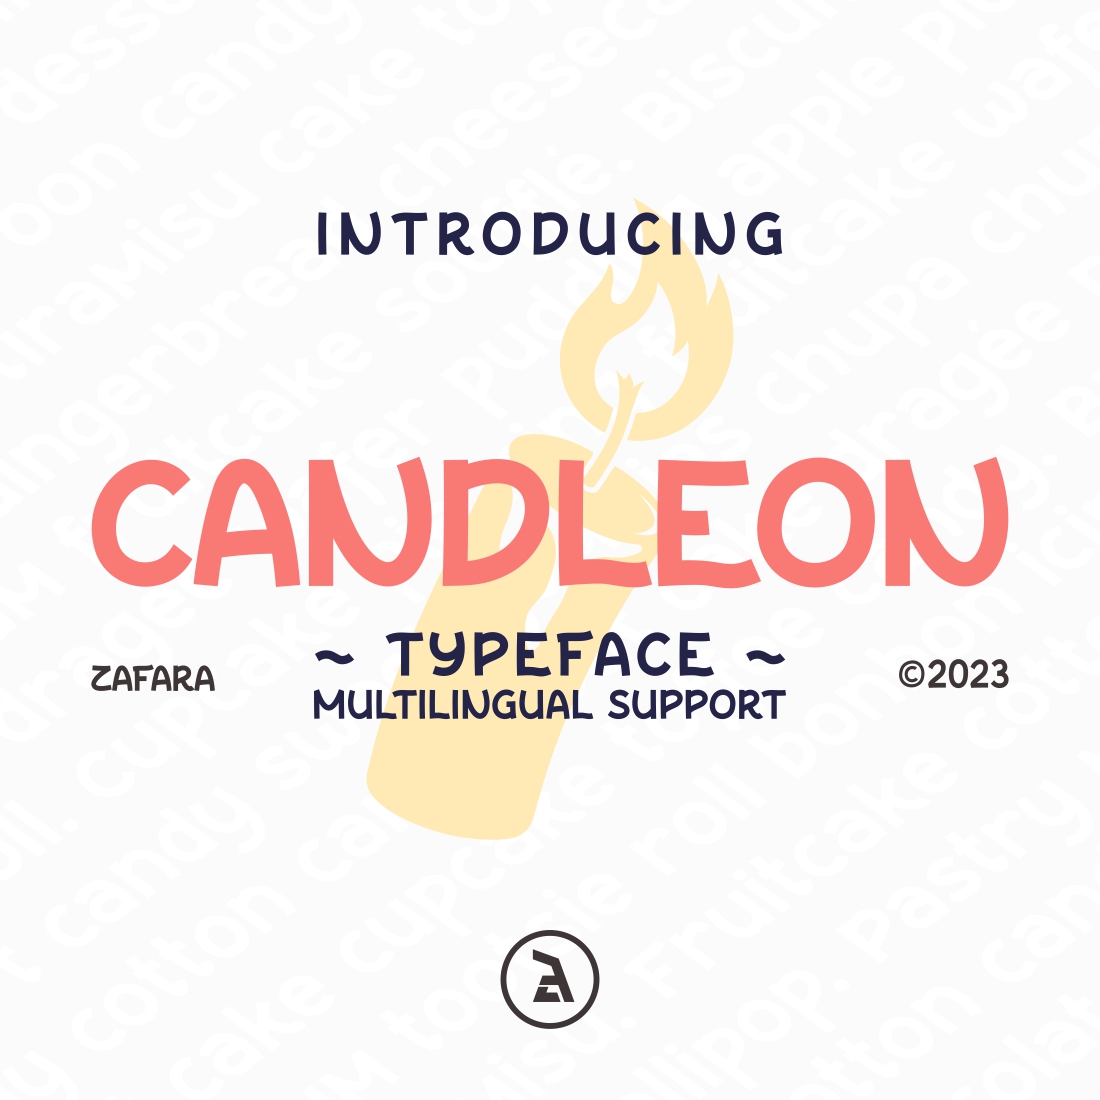 CANDLEON Typeface cover image.